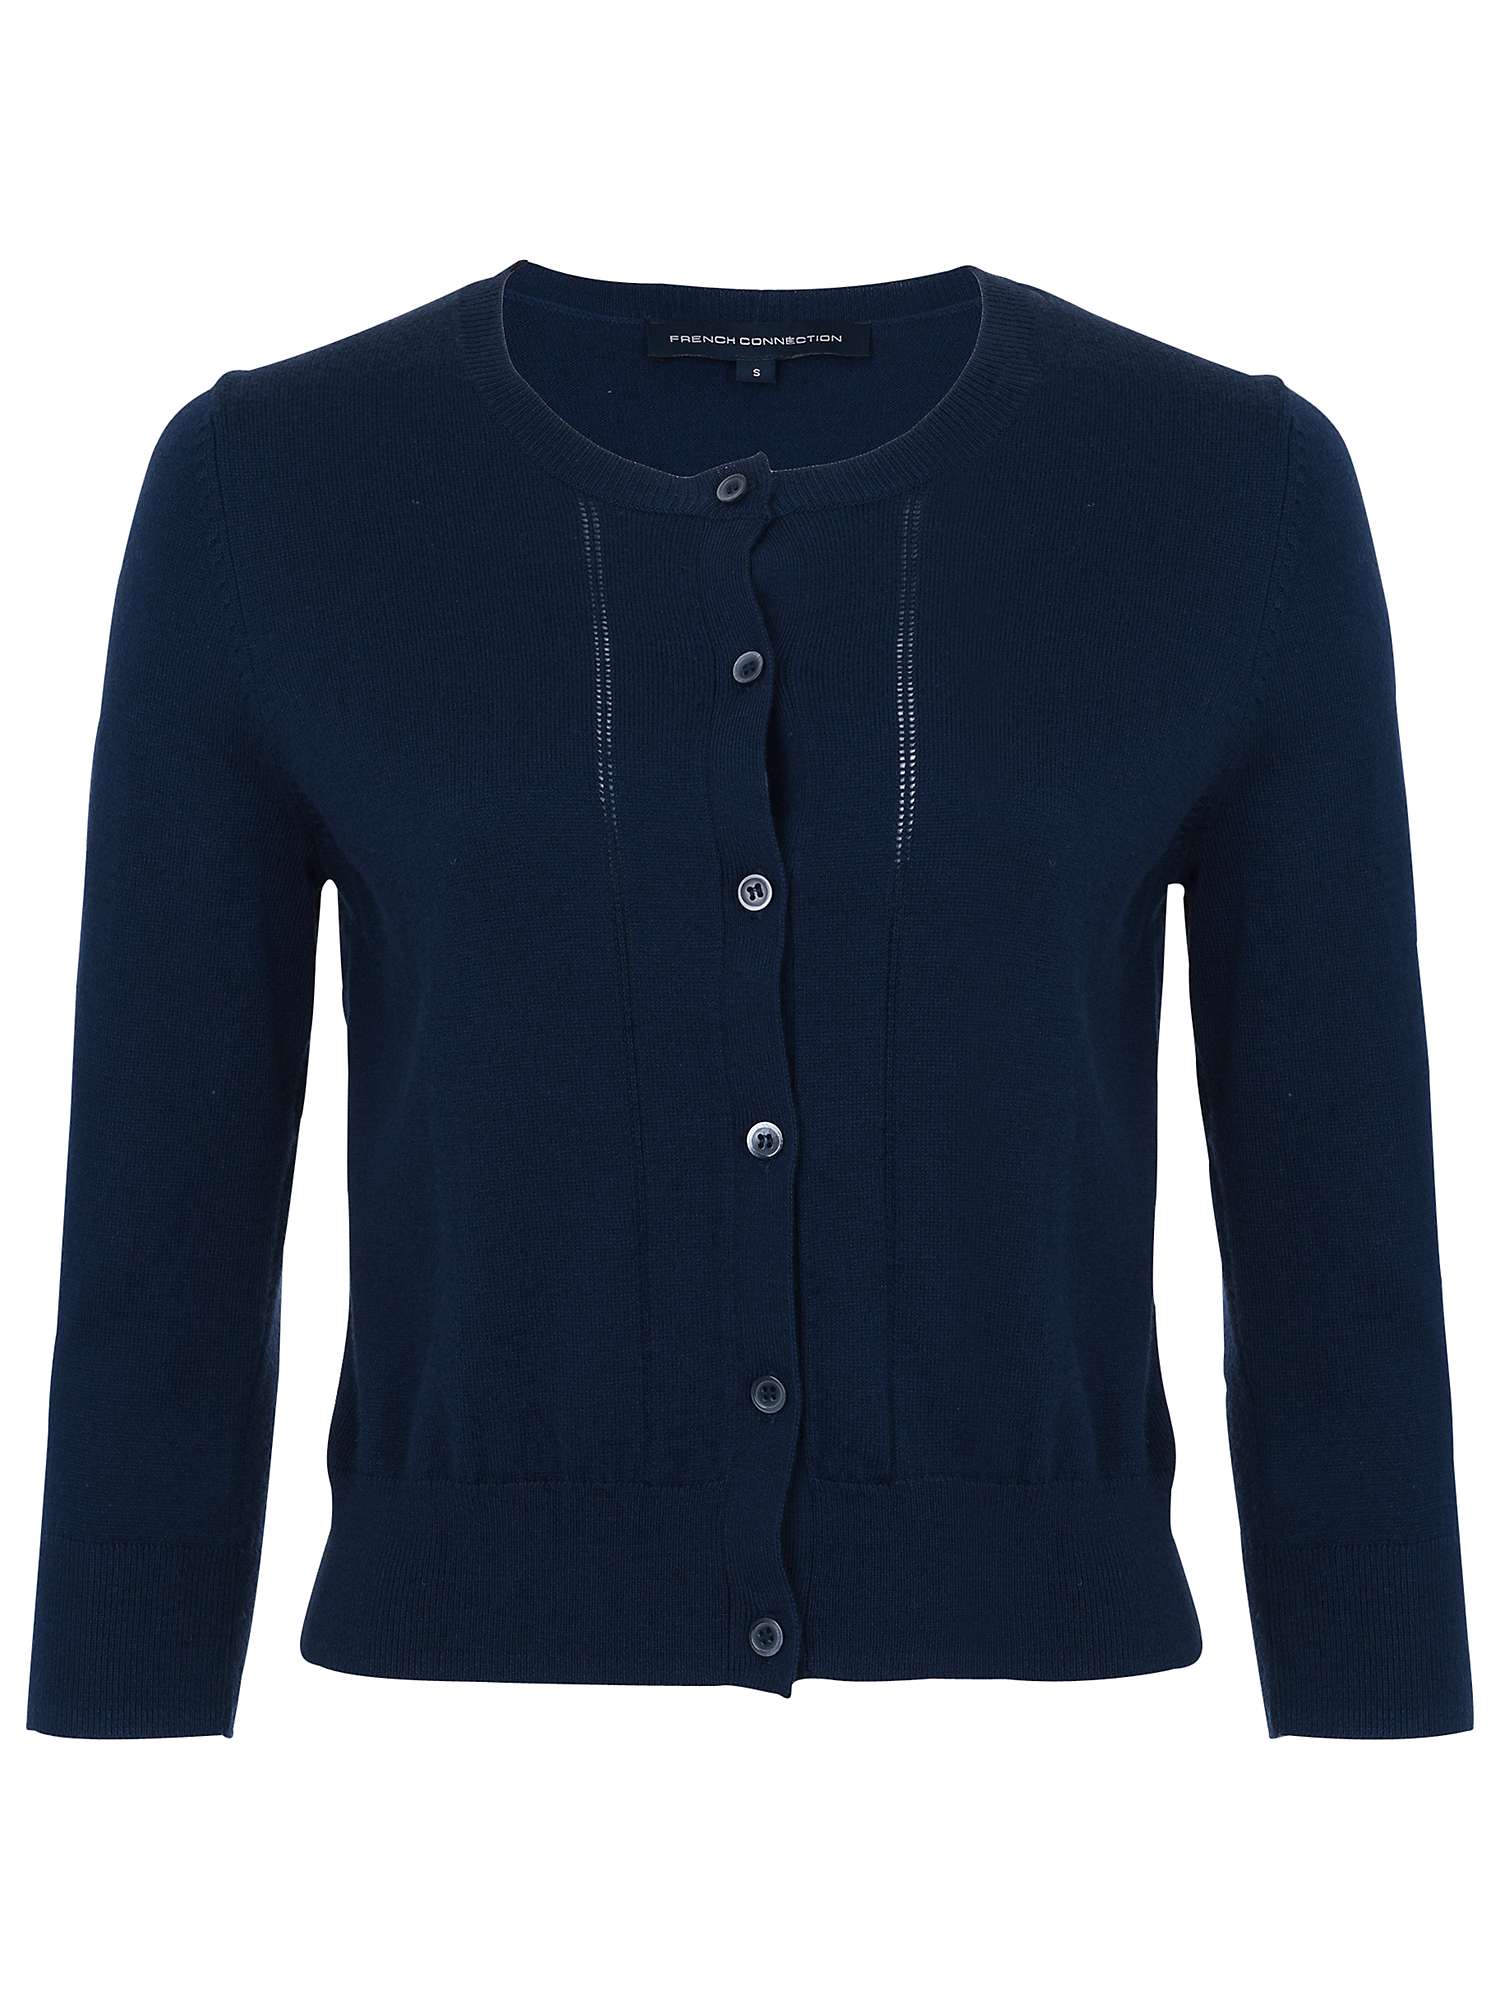 Buy French Connection Spring Bambino Cardigan Online at johnlewis.com